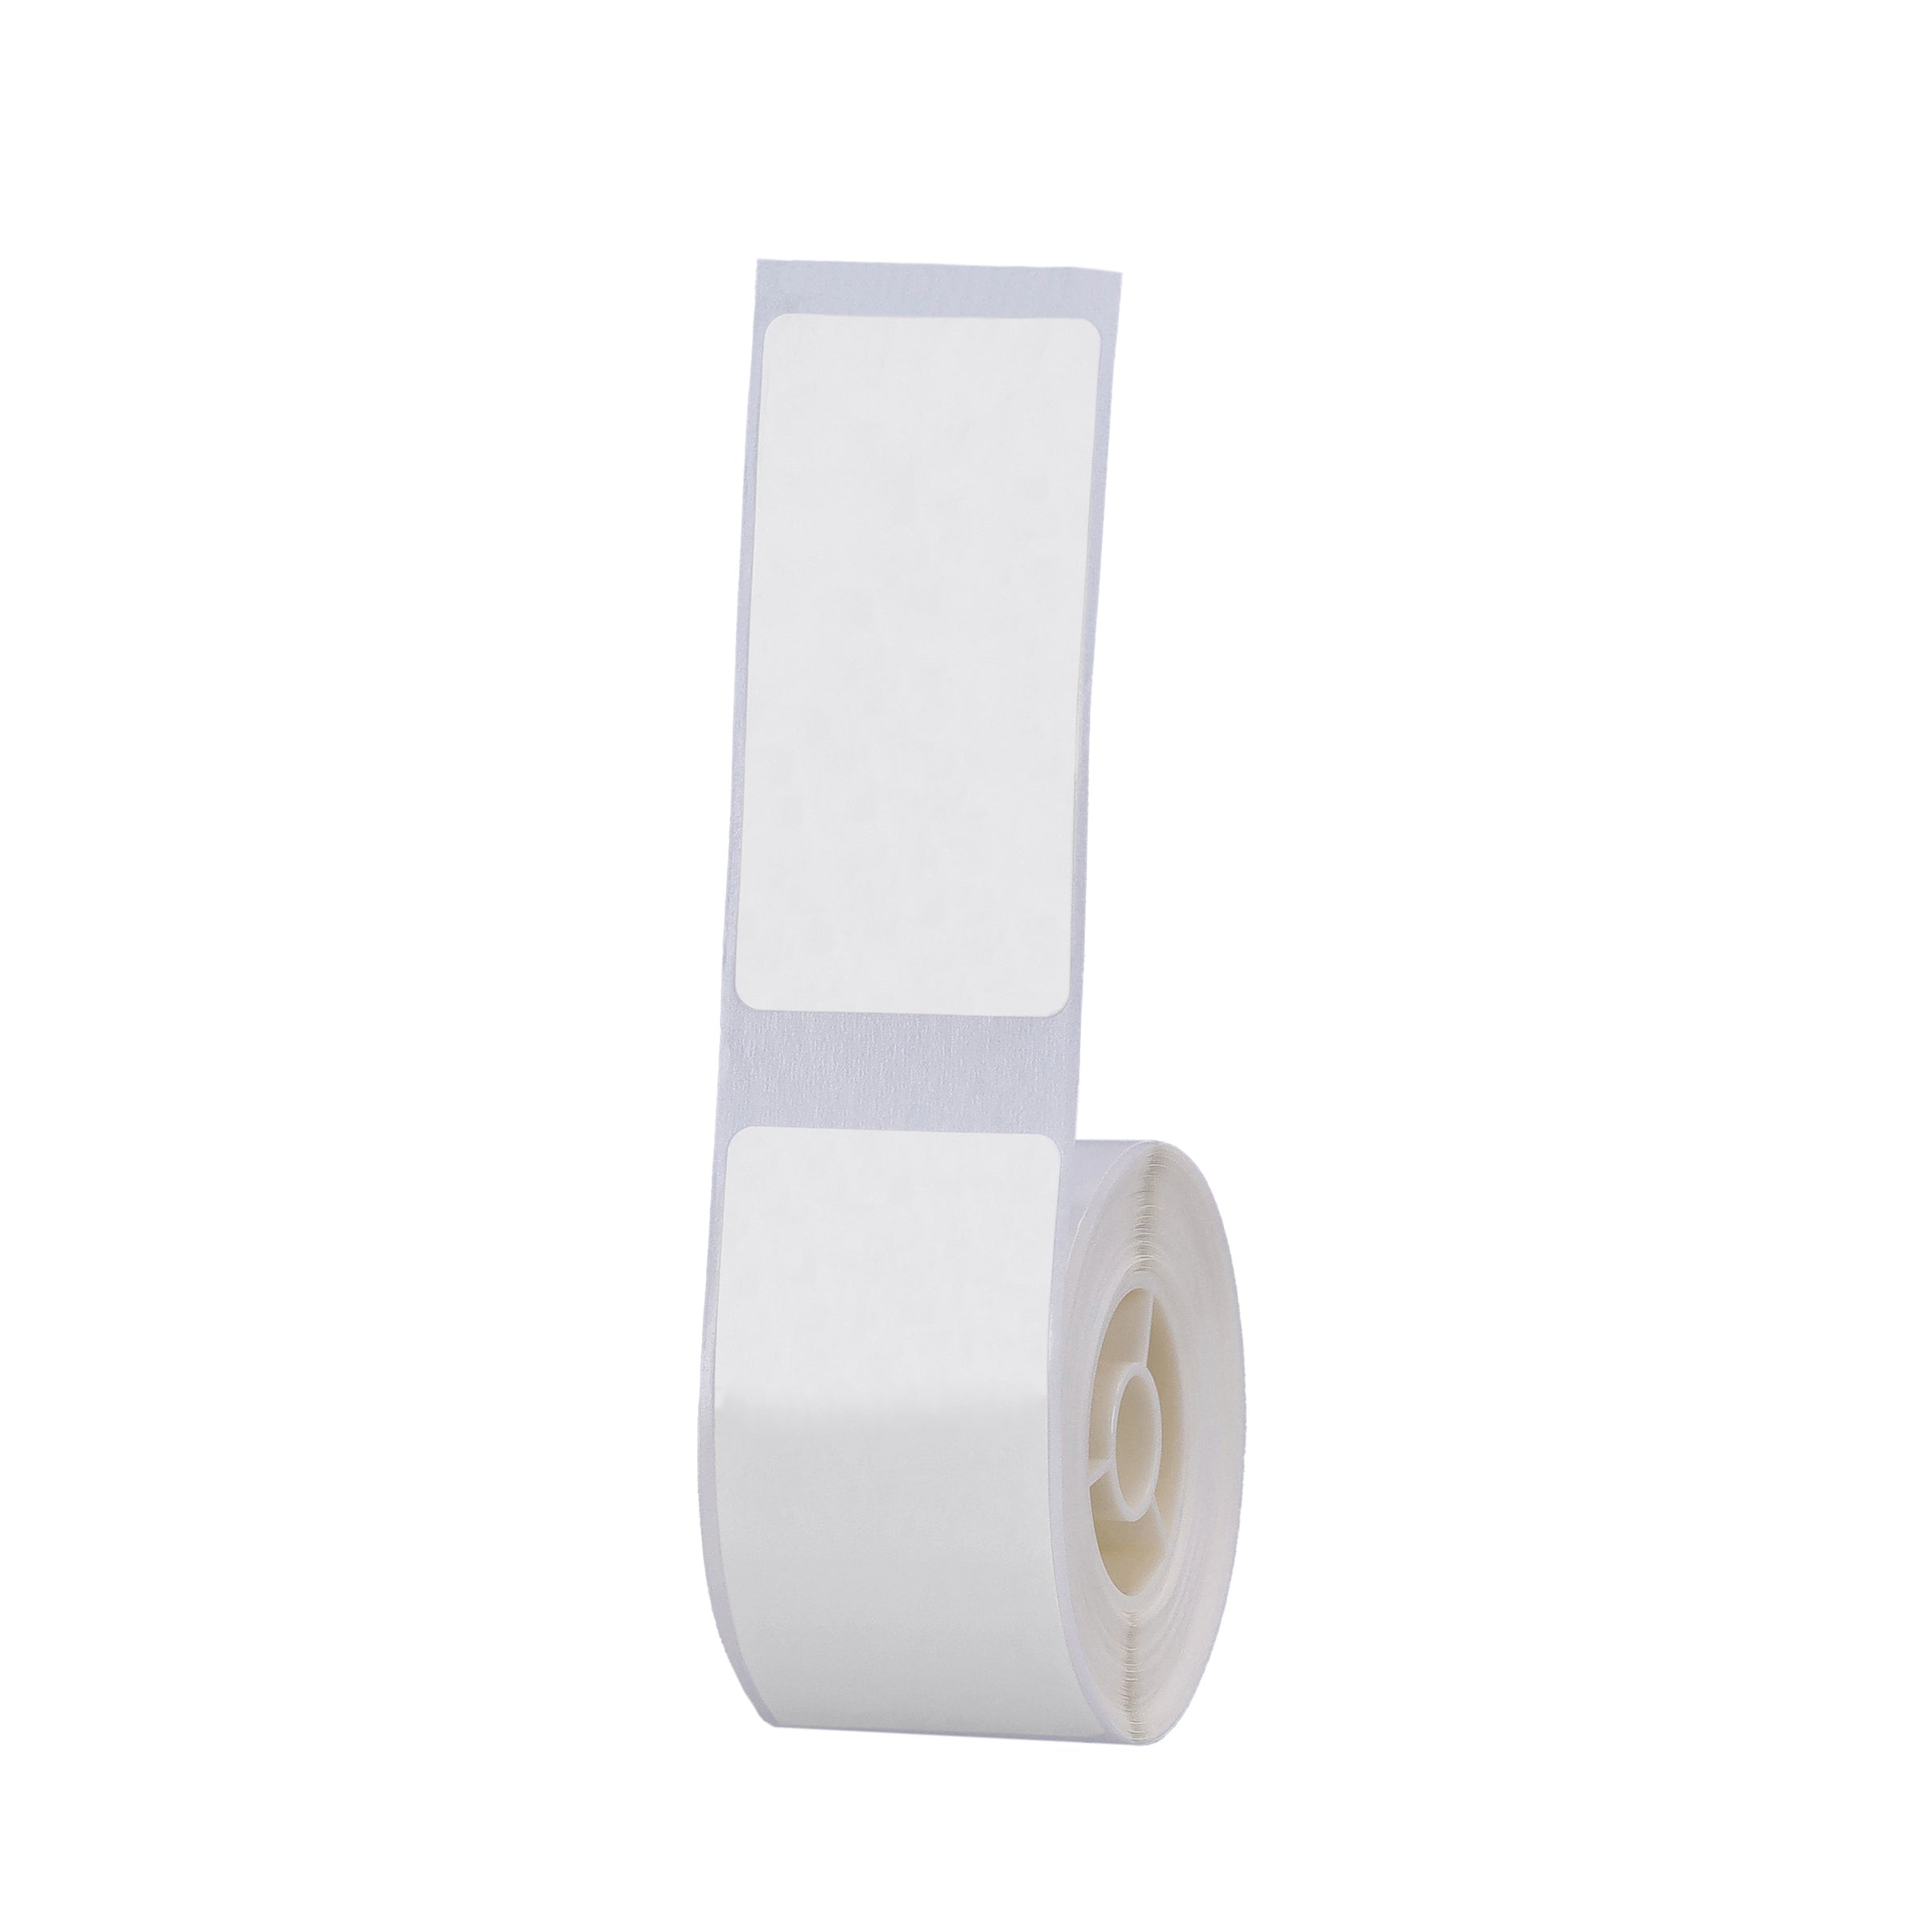 NB374 - NIIMBOT - D101 ONLY - R25*50 - 130 LABELS PER ROLL - WHITE